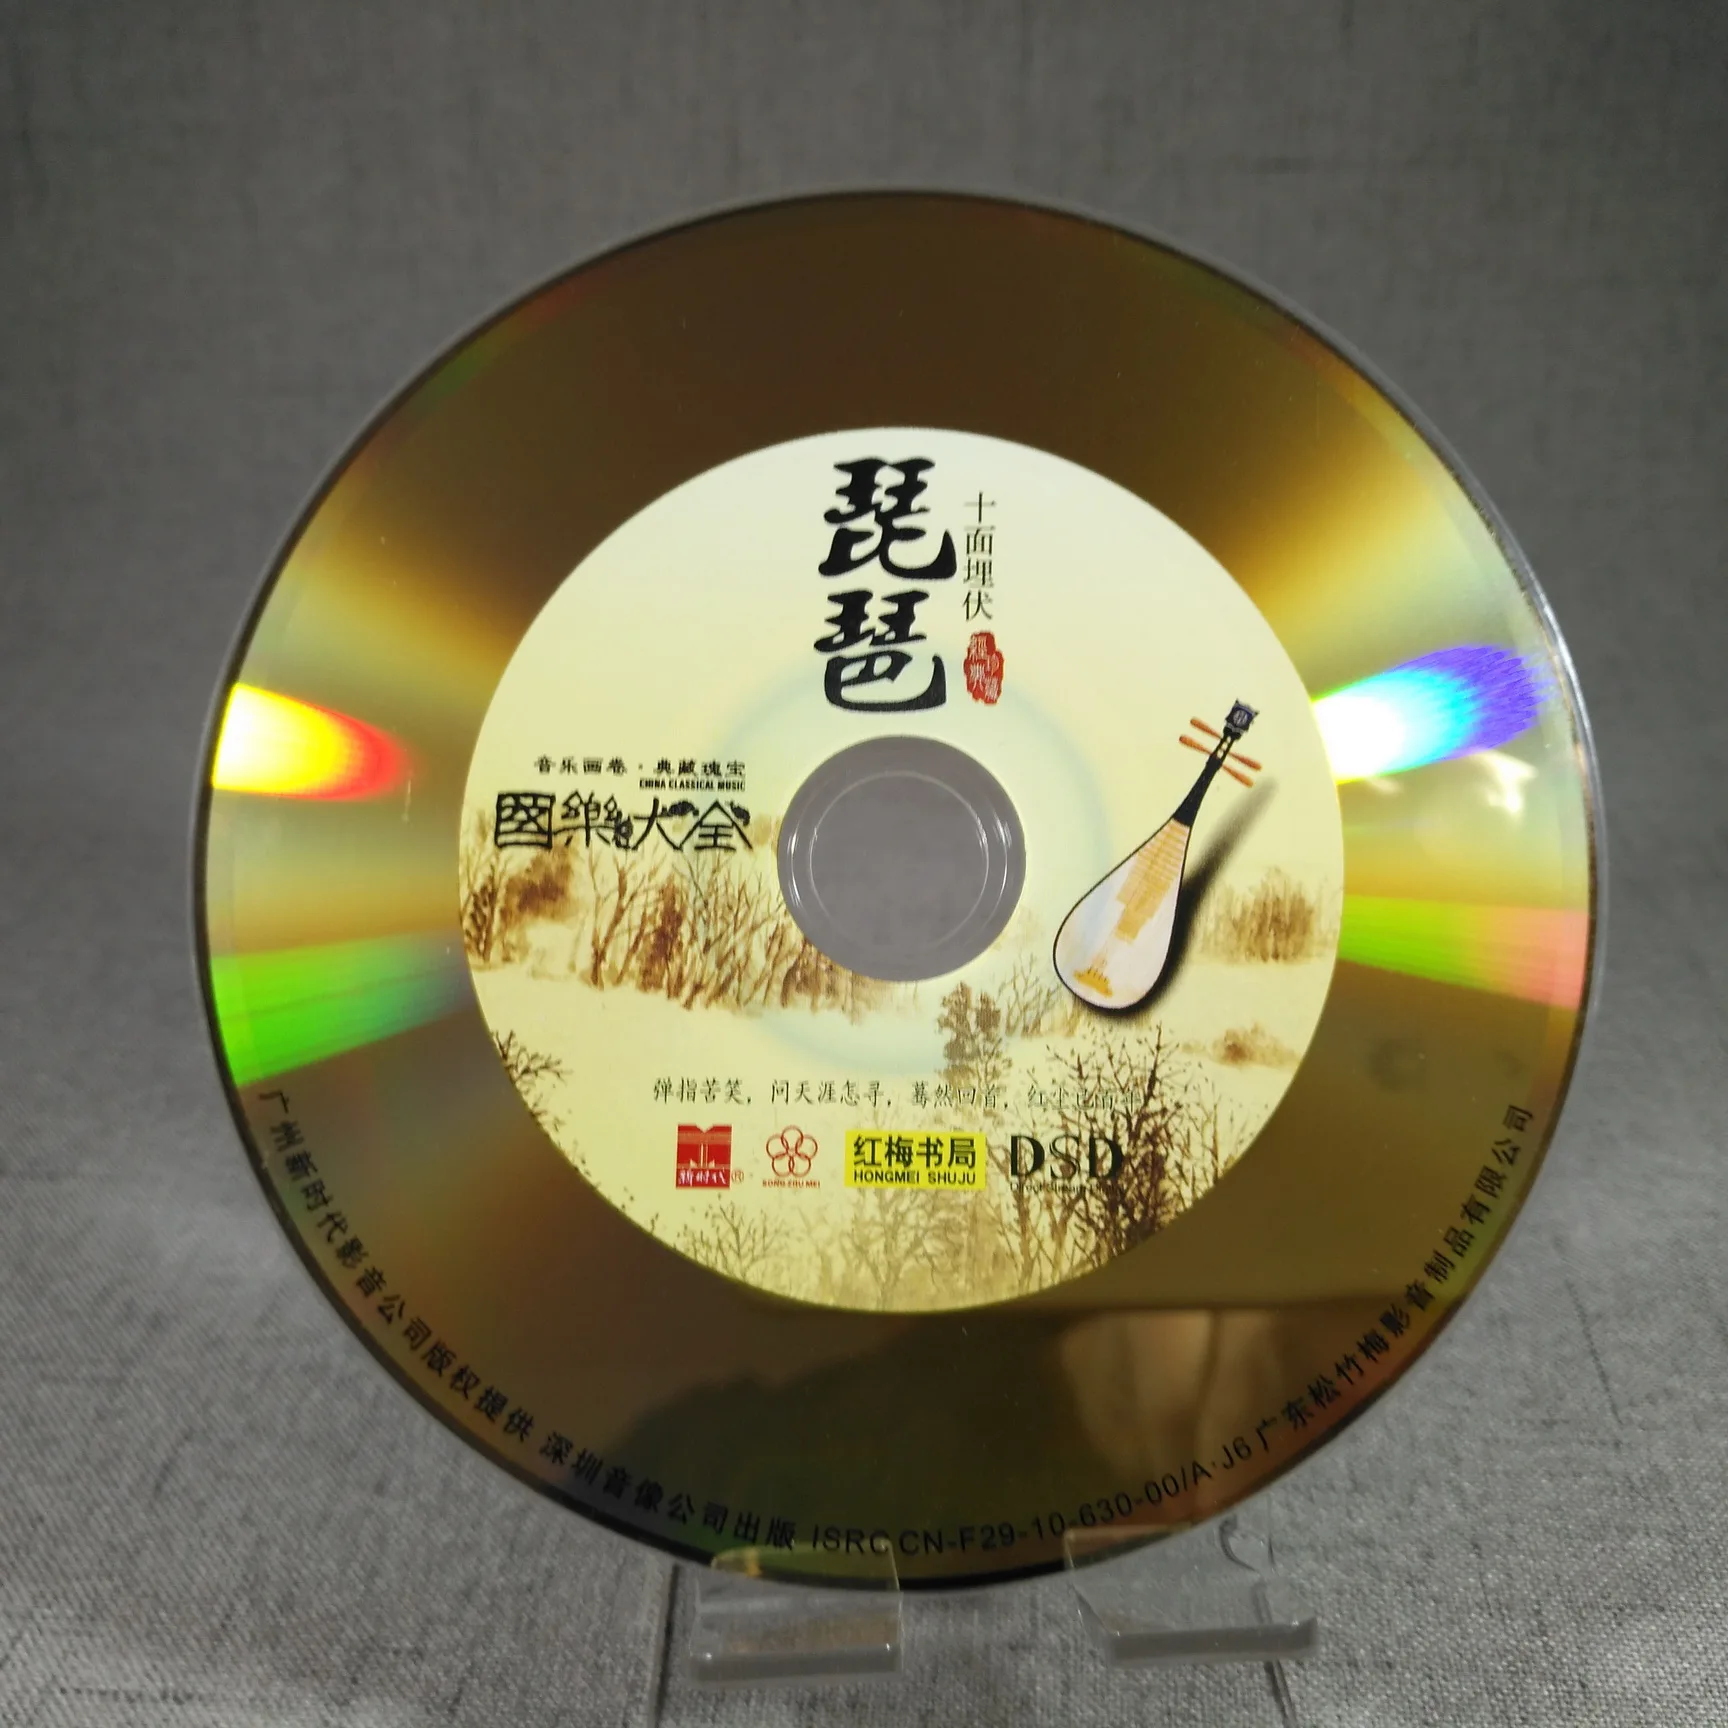 Movies Dvd Records Replication With Offset Or Screen Printing Digipak - Buy  Dvd Offset Printing,Dvd Record,Movie Dvd Product on Alibaba.com